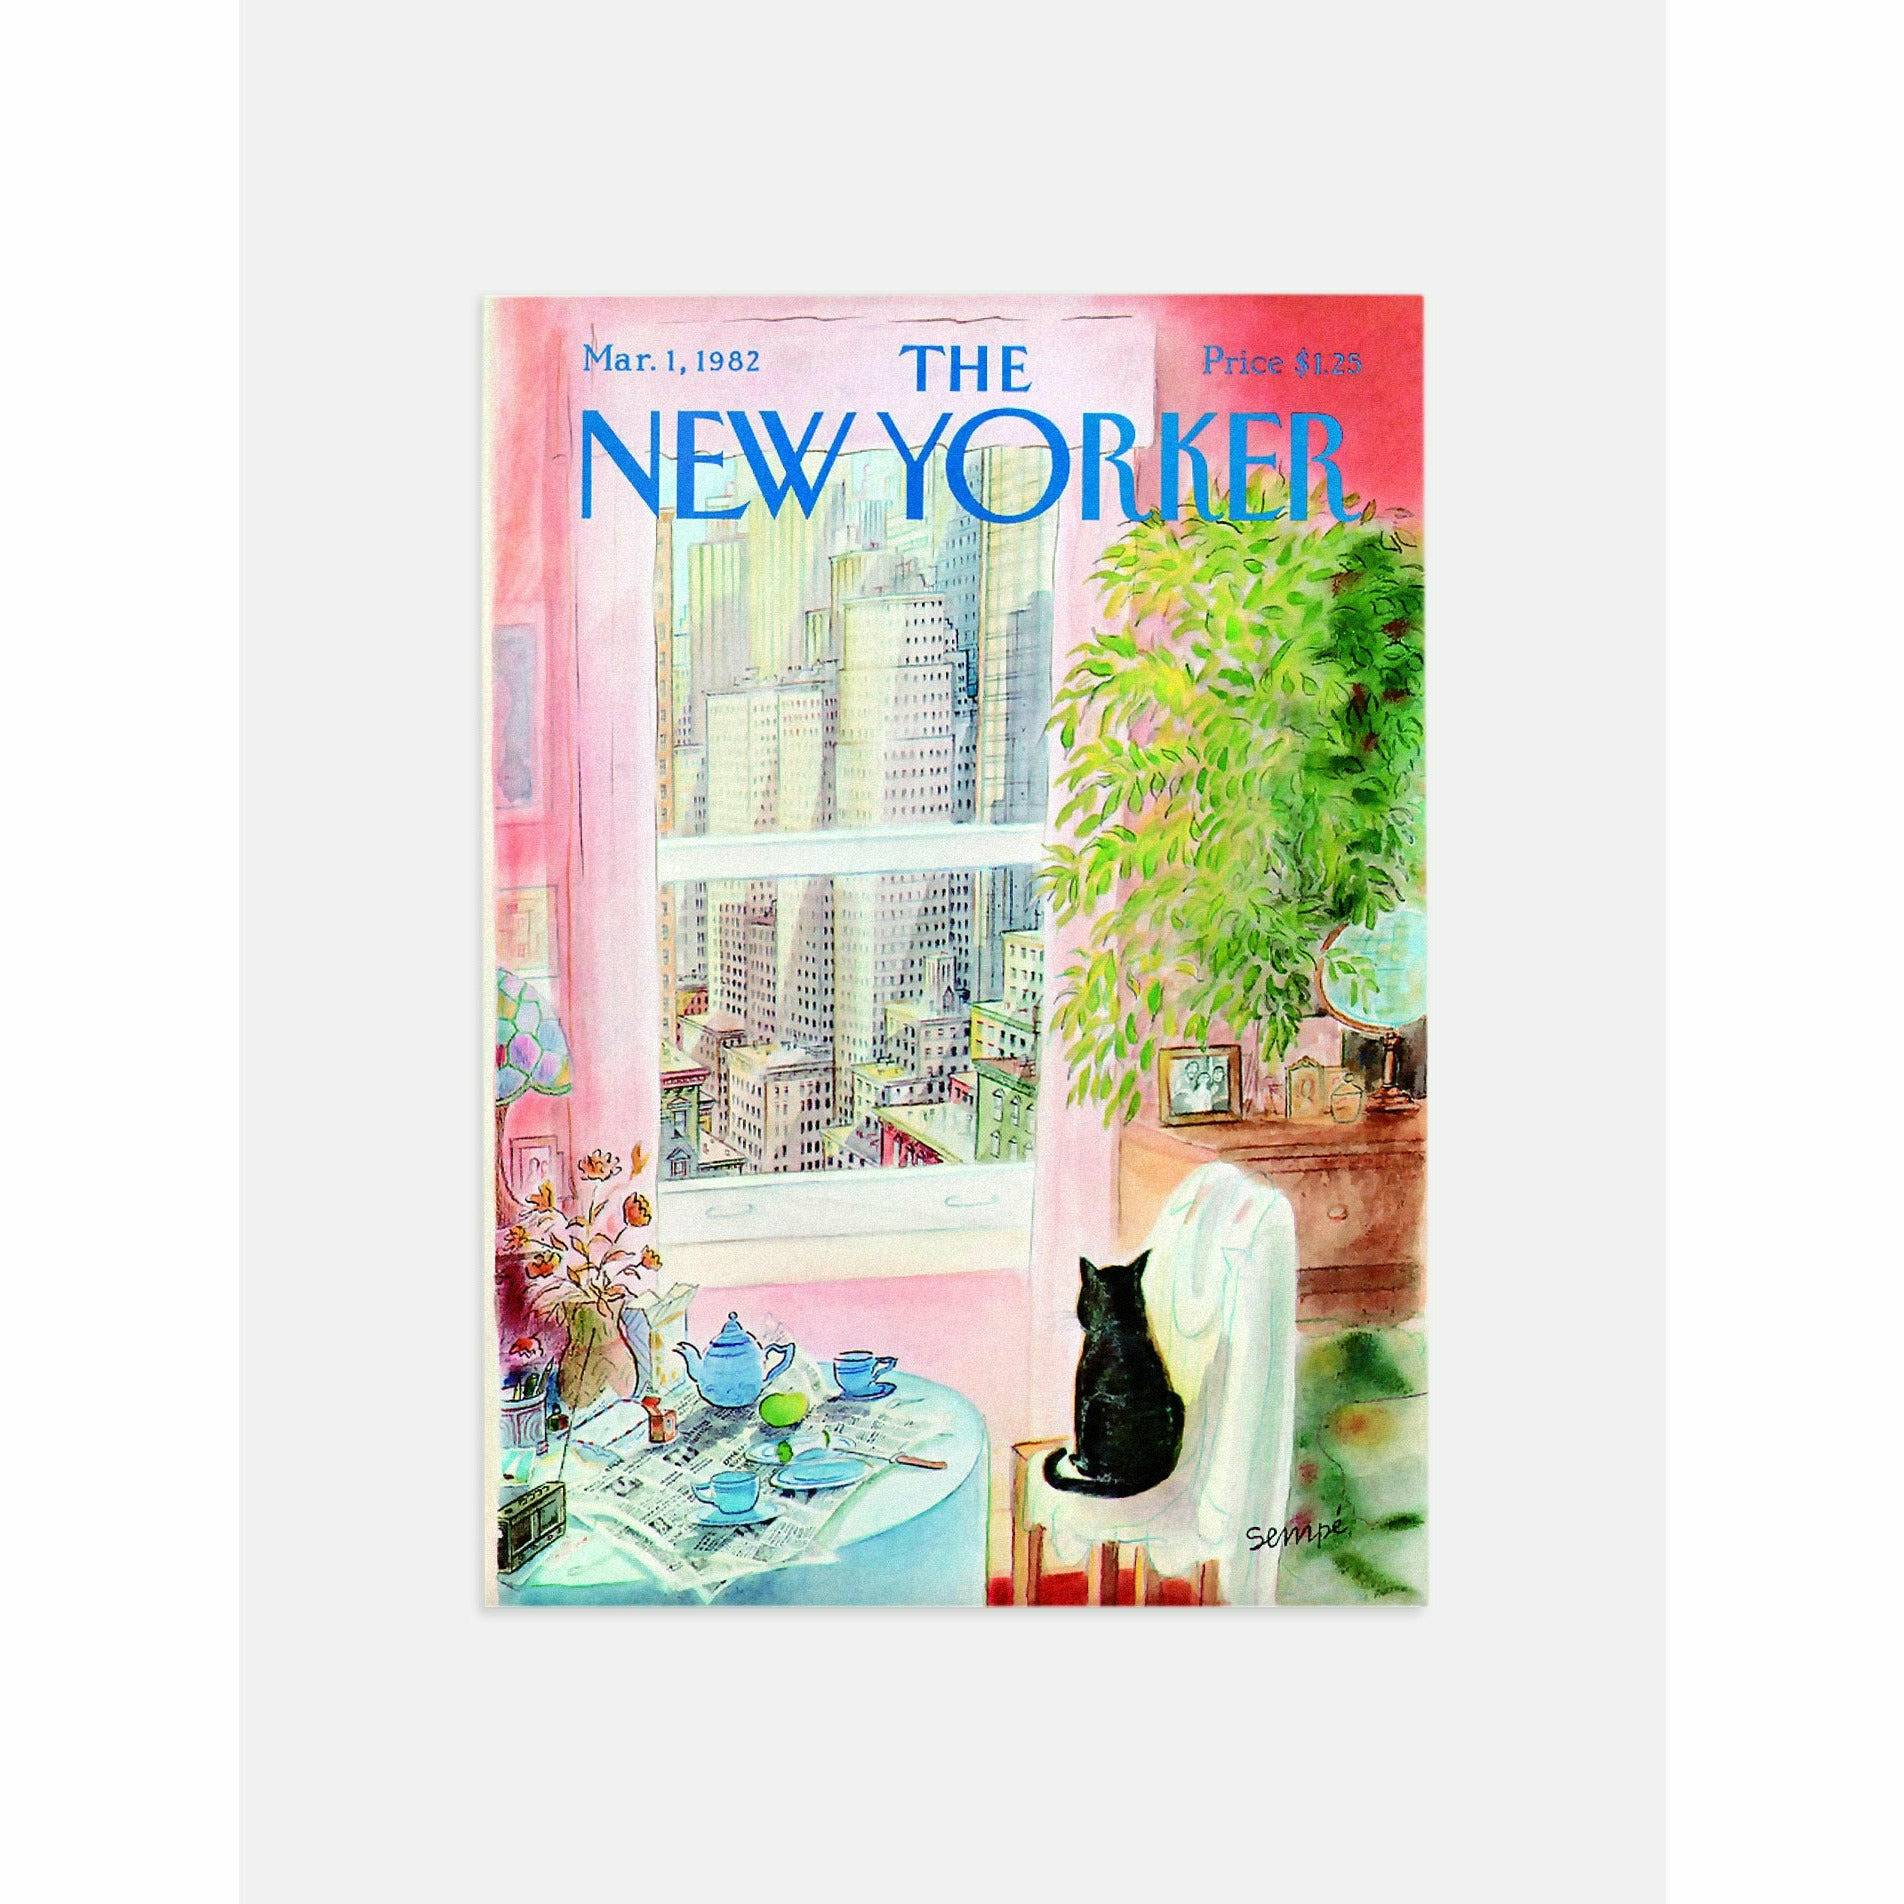 The New Yorker Poster 1982